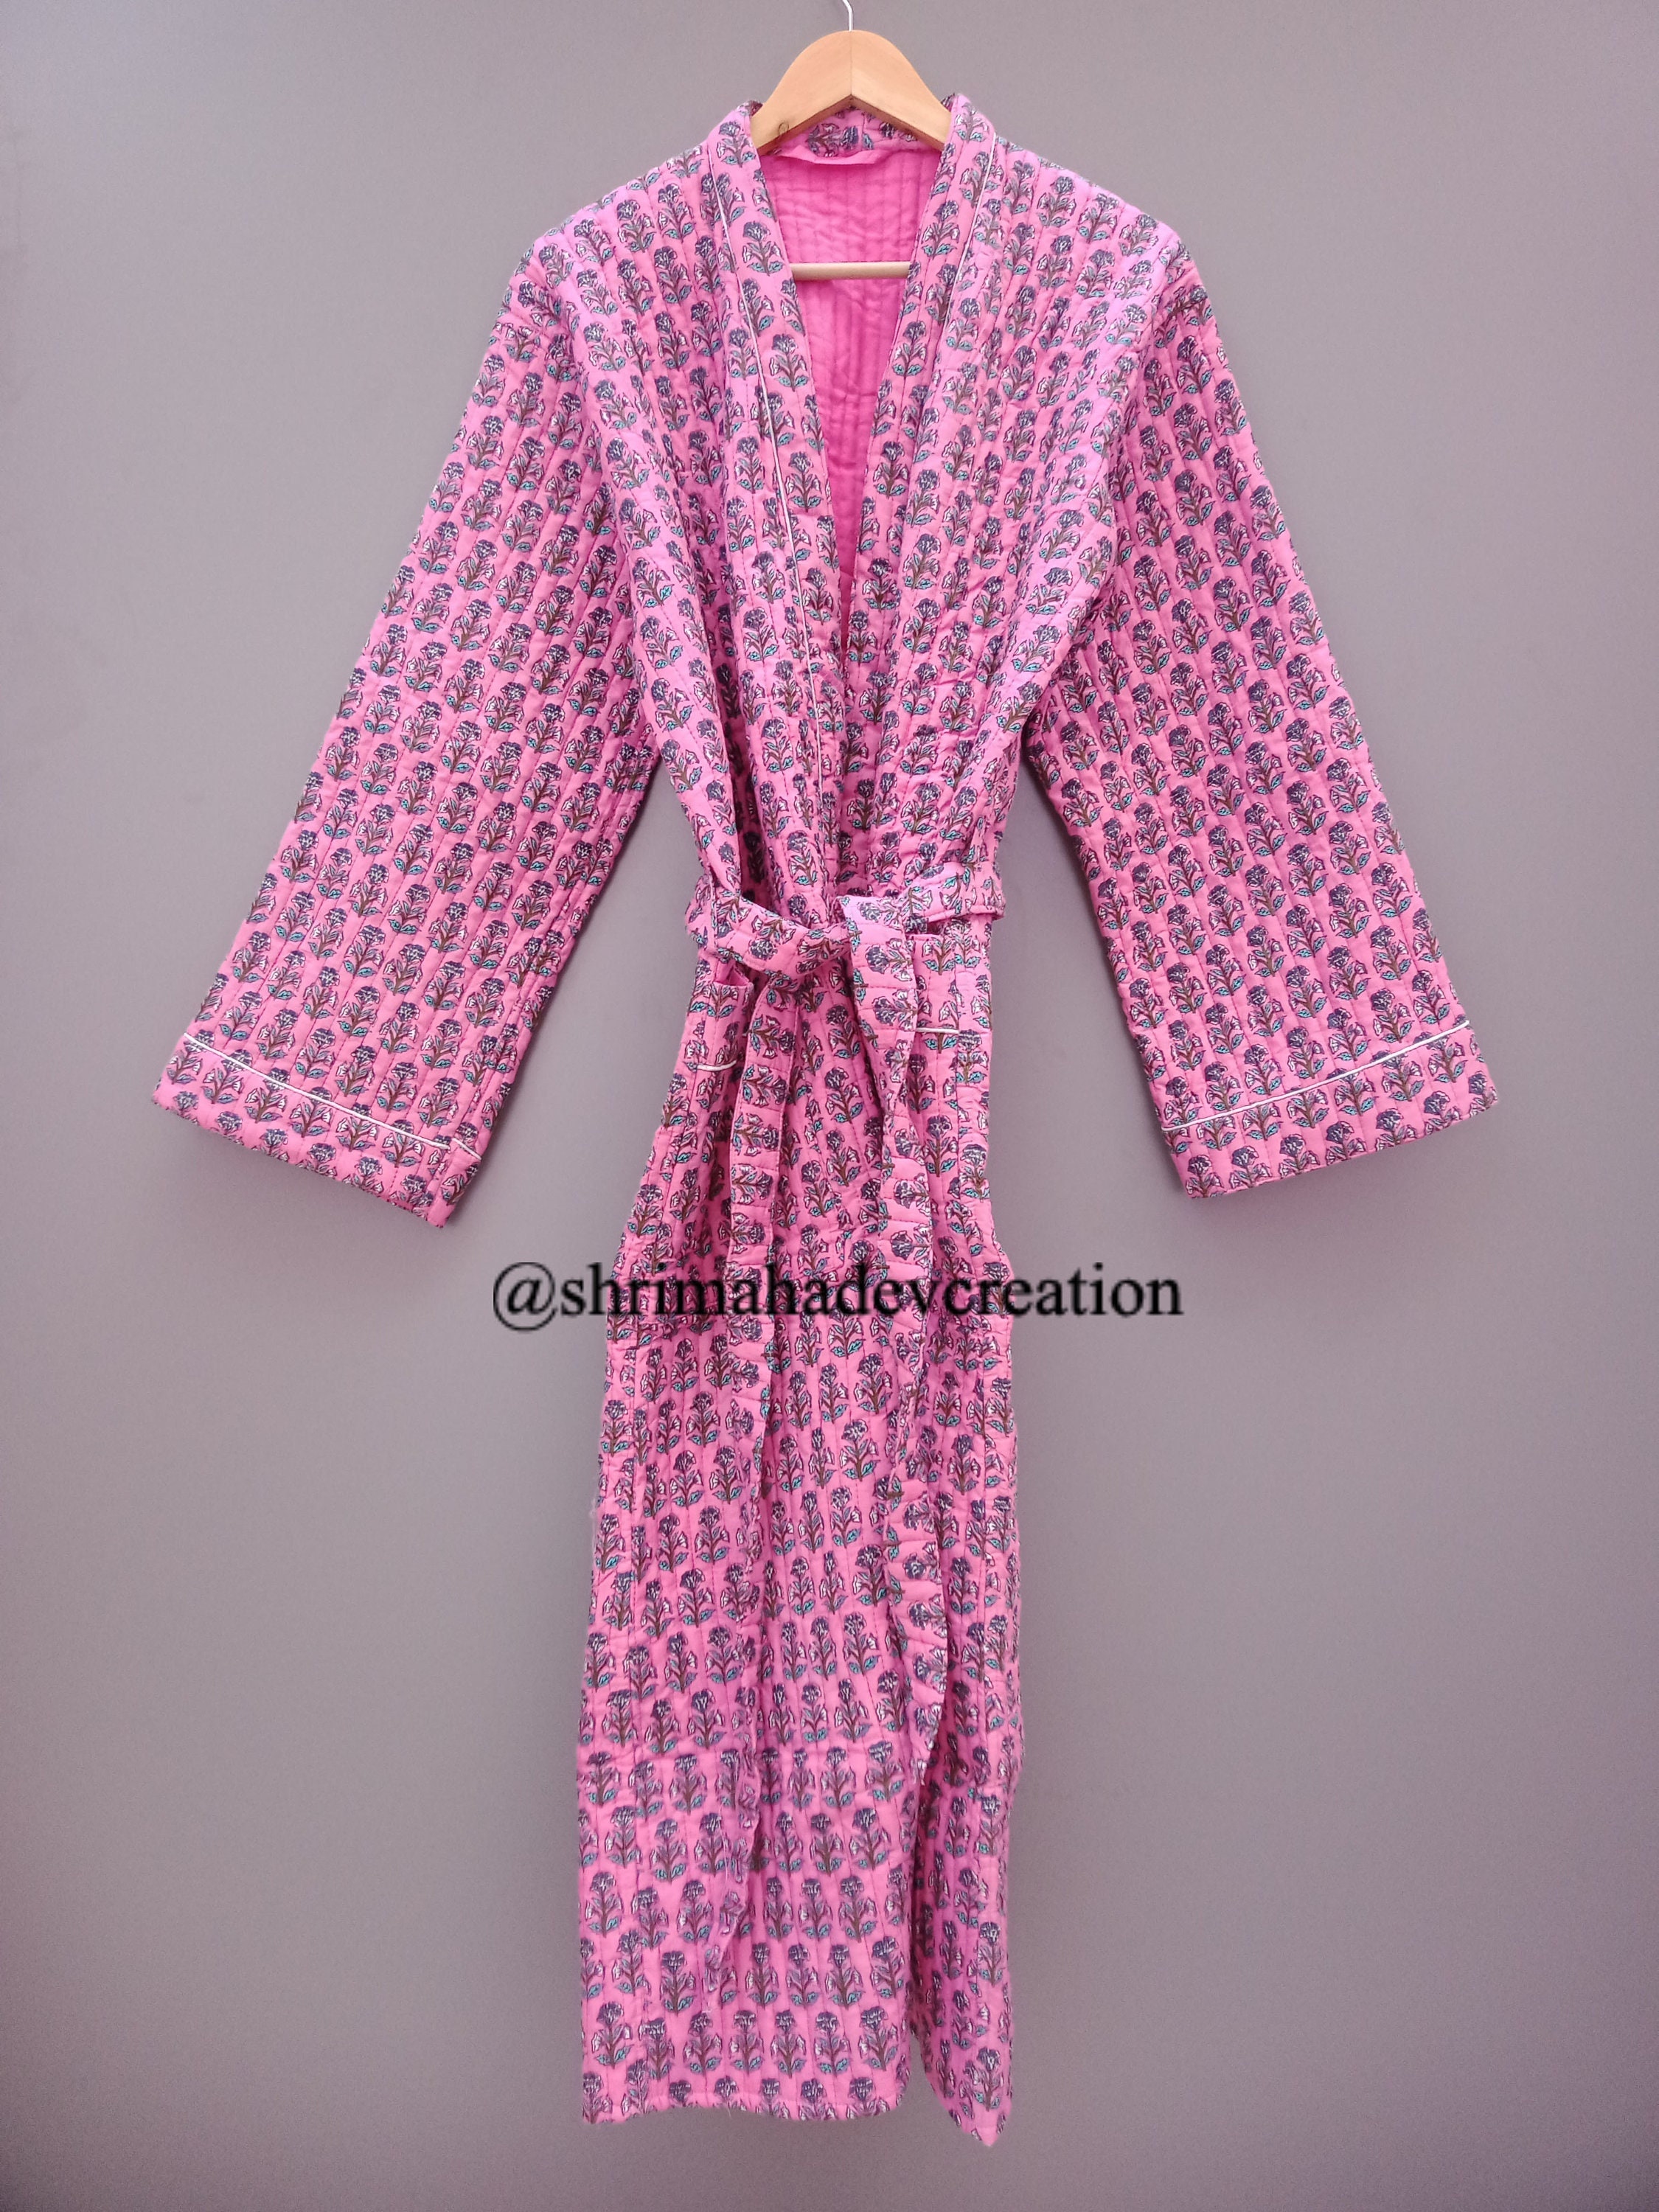 Handmade cotton block printed bathrobe bridesmaid reversible quilted kimono women wear cotton quilted robes winter warm long jacket